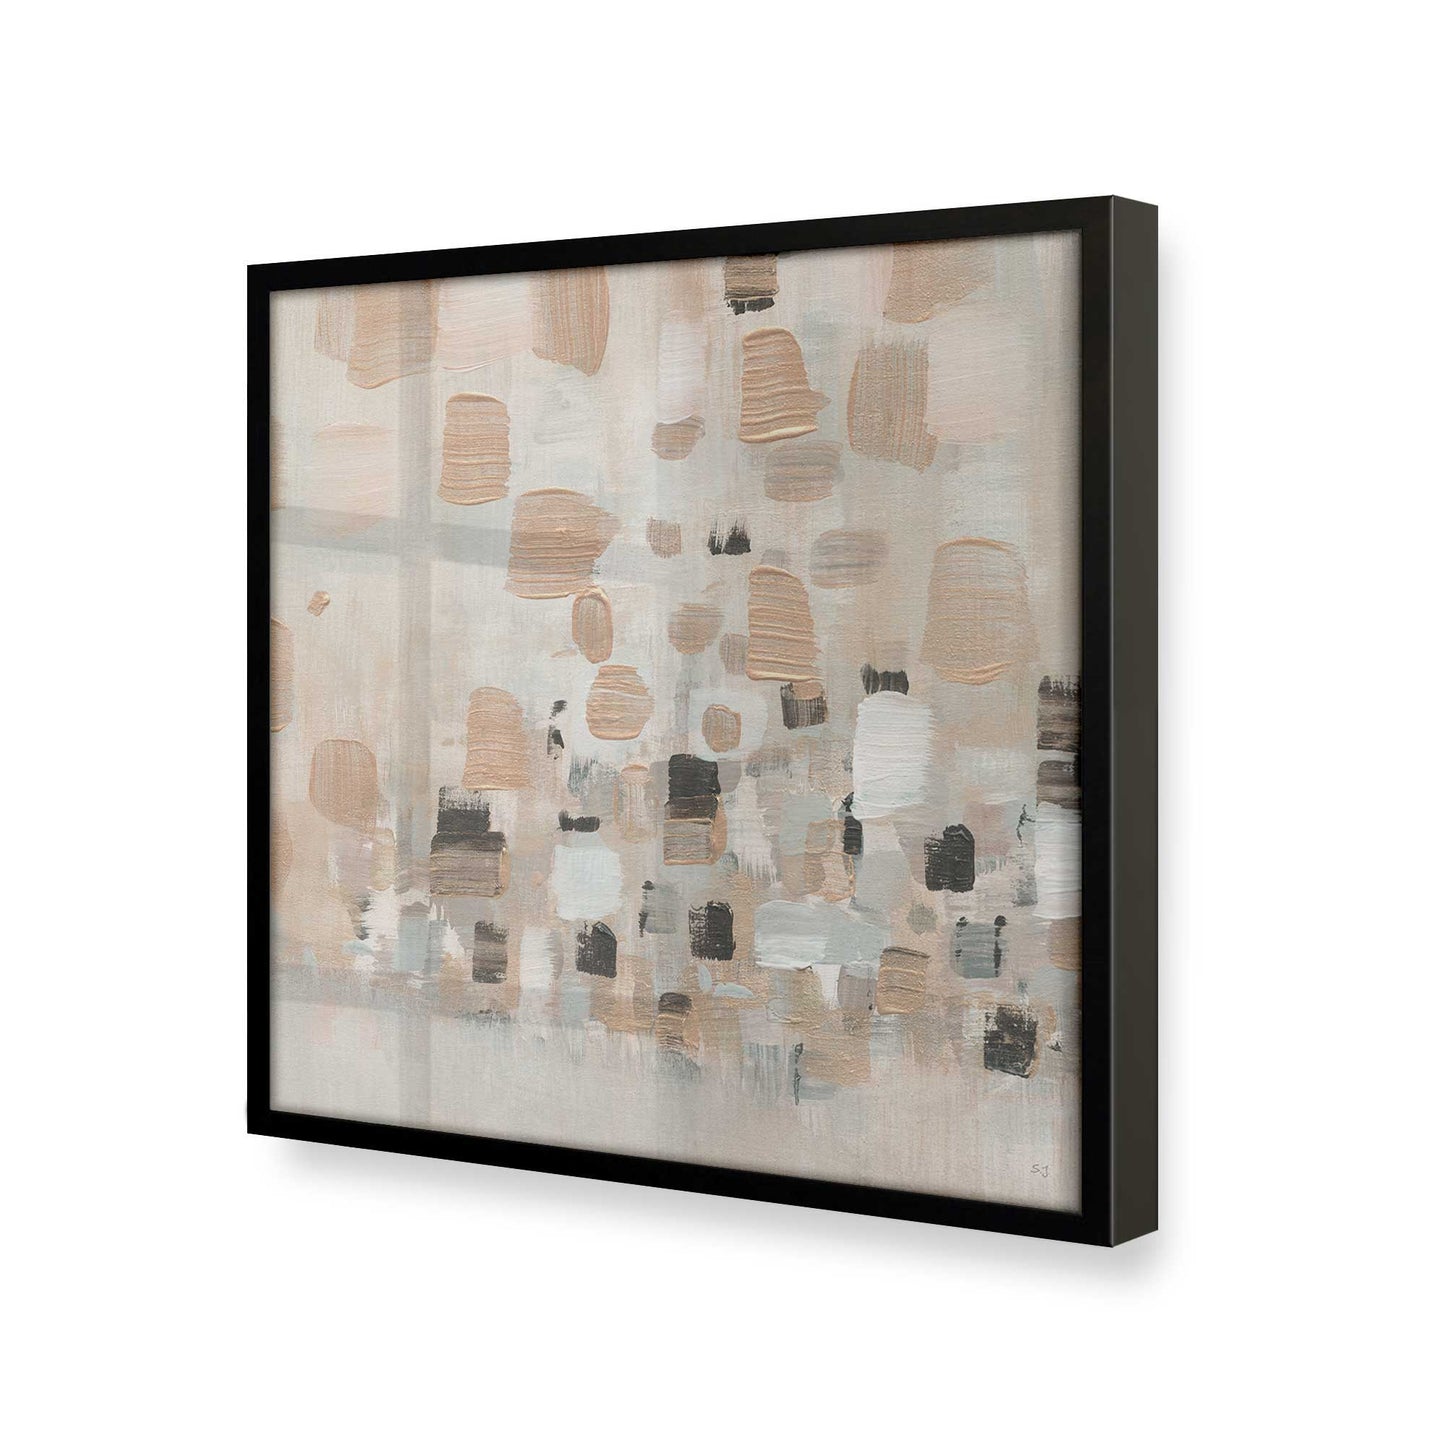 [Color:Satin Black], Picture of art in a Satin Black frame at an angle